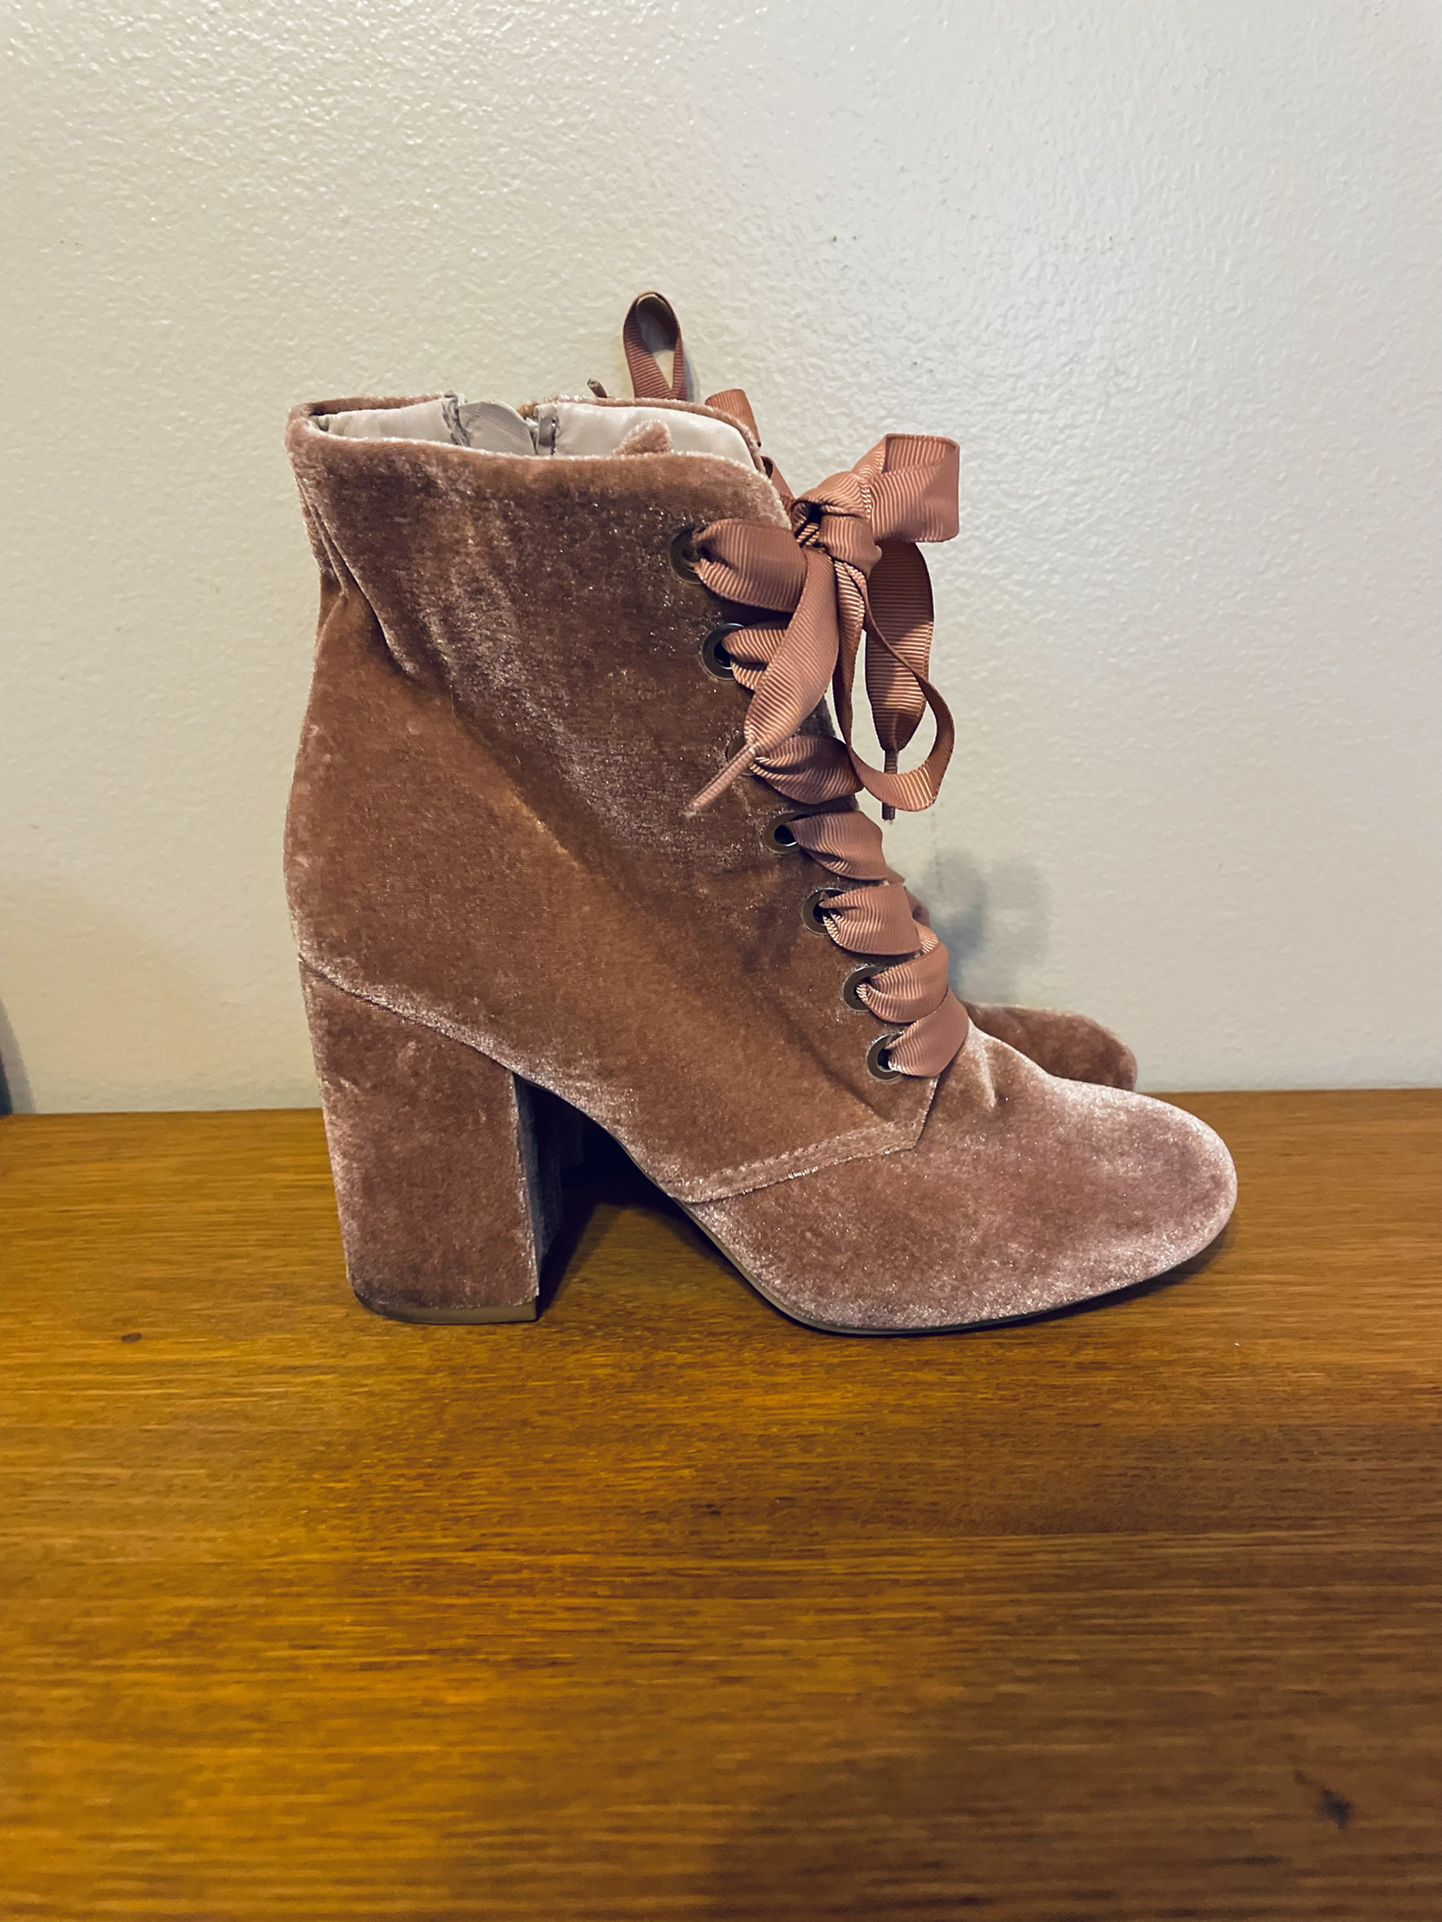 6.5 Pink Heels by Kenneth Cole Reaction Booties